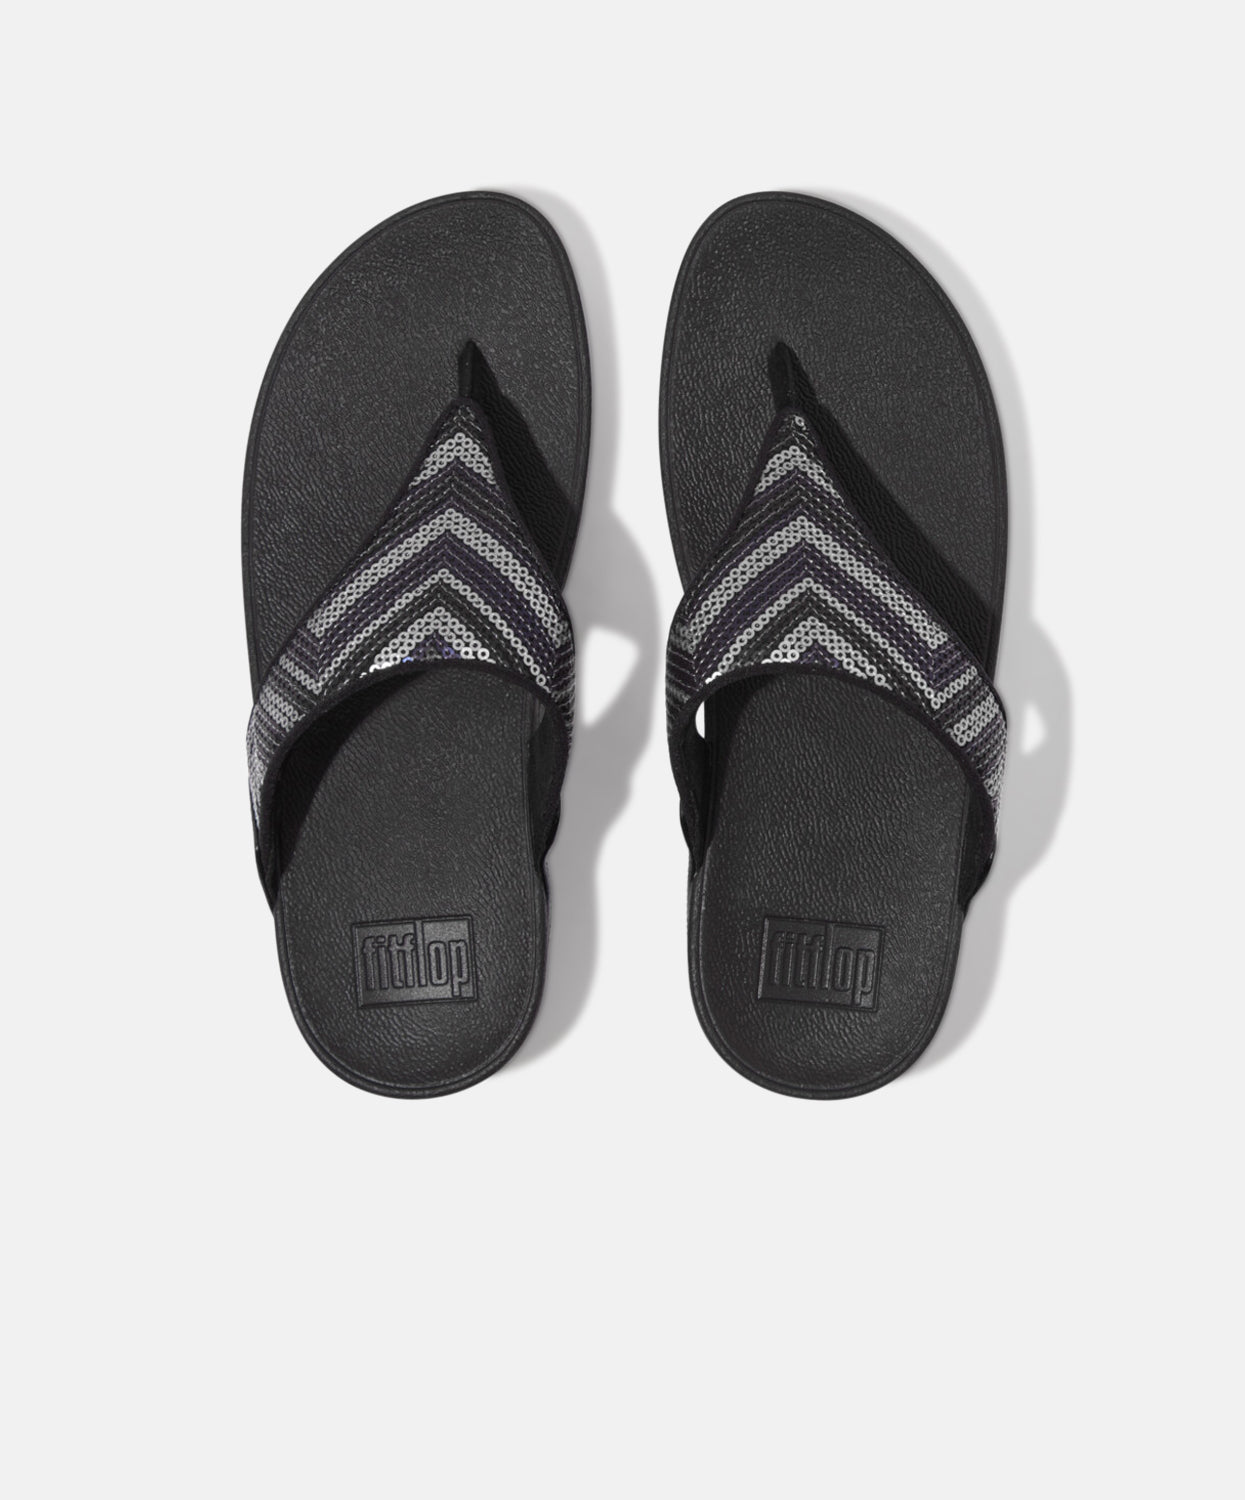 FitFlop Lulu Sequin ZigZag – Orders Sandal Express Over Free Bstore Black | Toe-post $120 Shipping